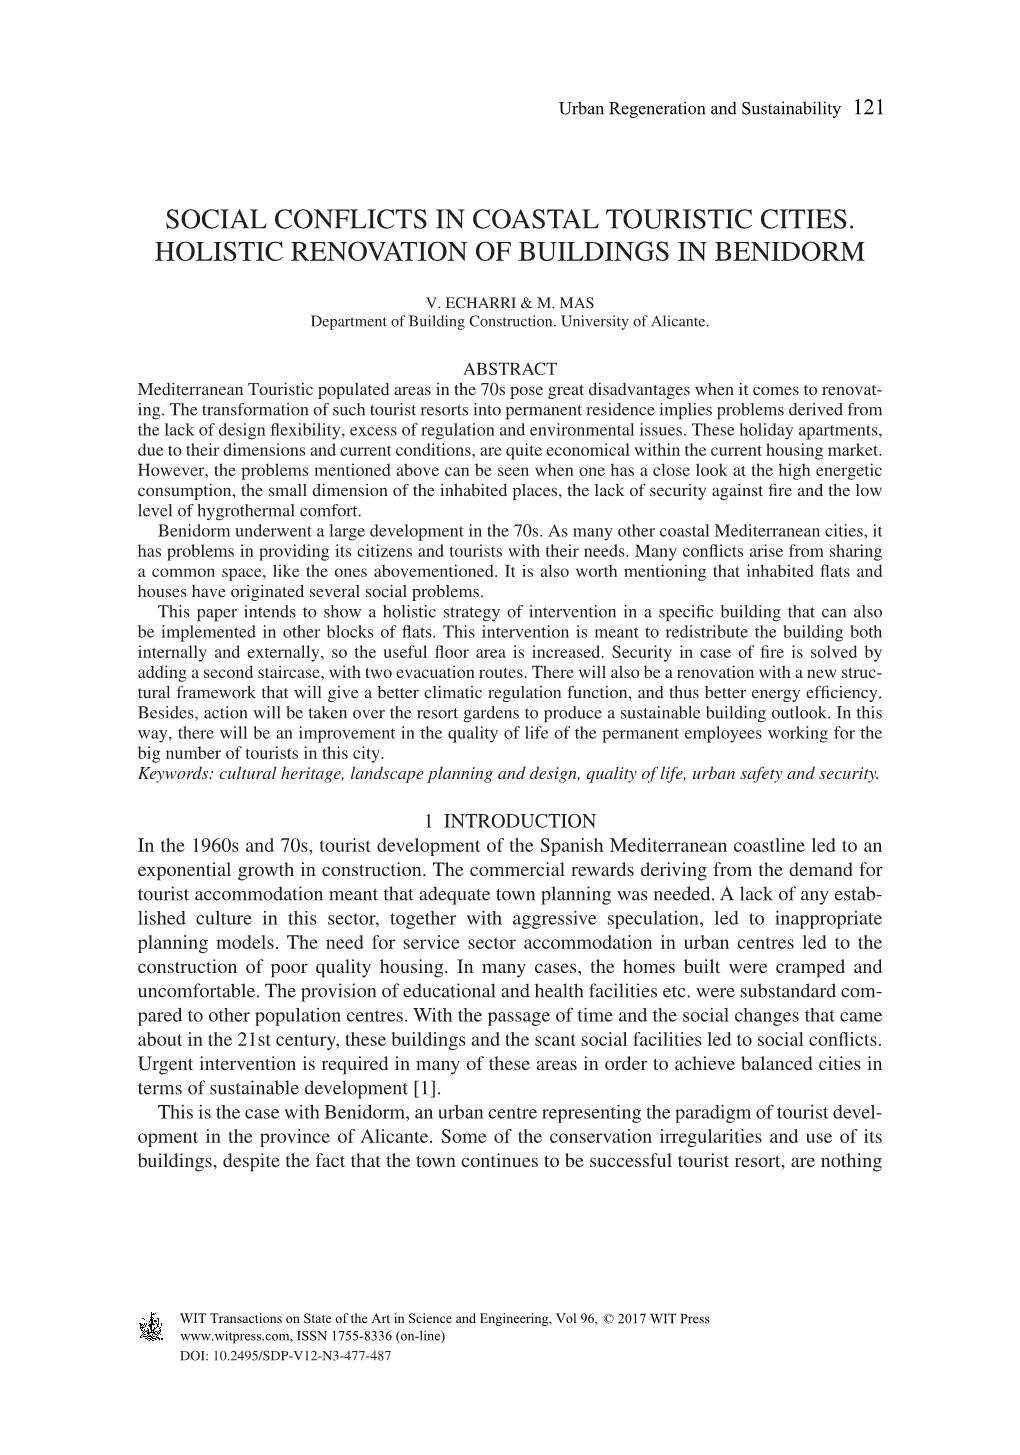 Social Conflicts in Coastal Touristic Cities. Holistic Renovation of Buildings in Benidorm